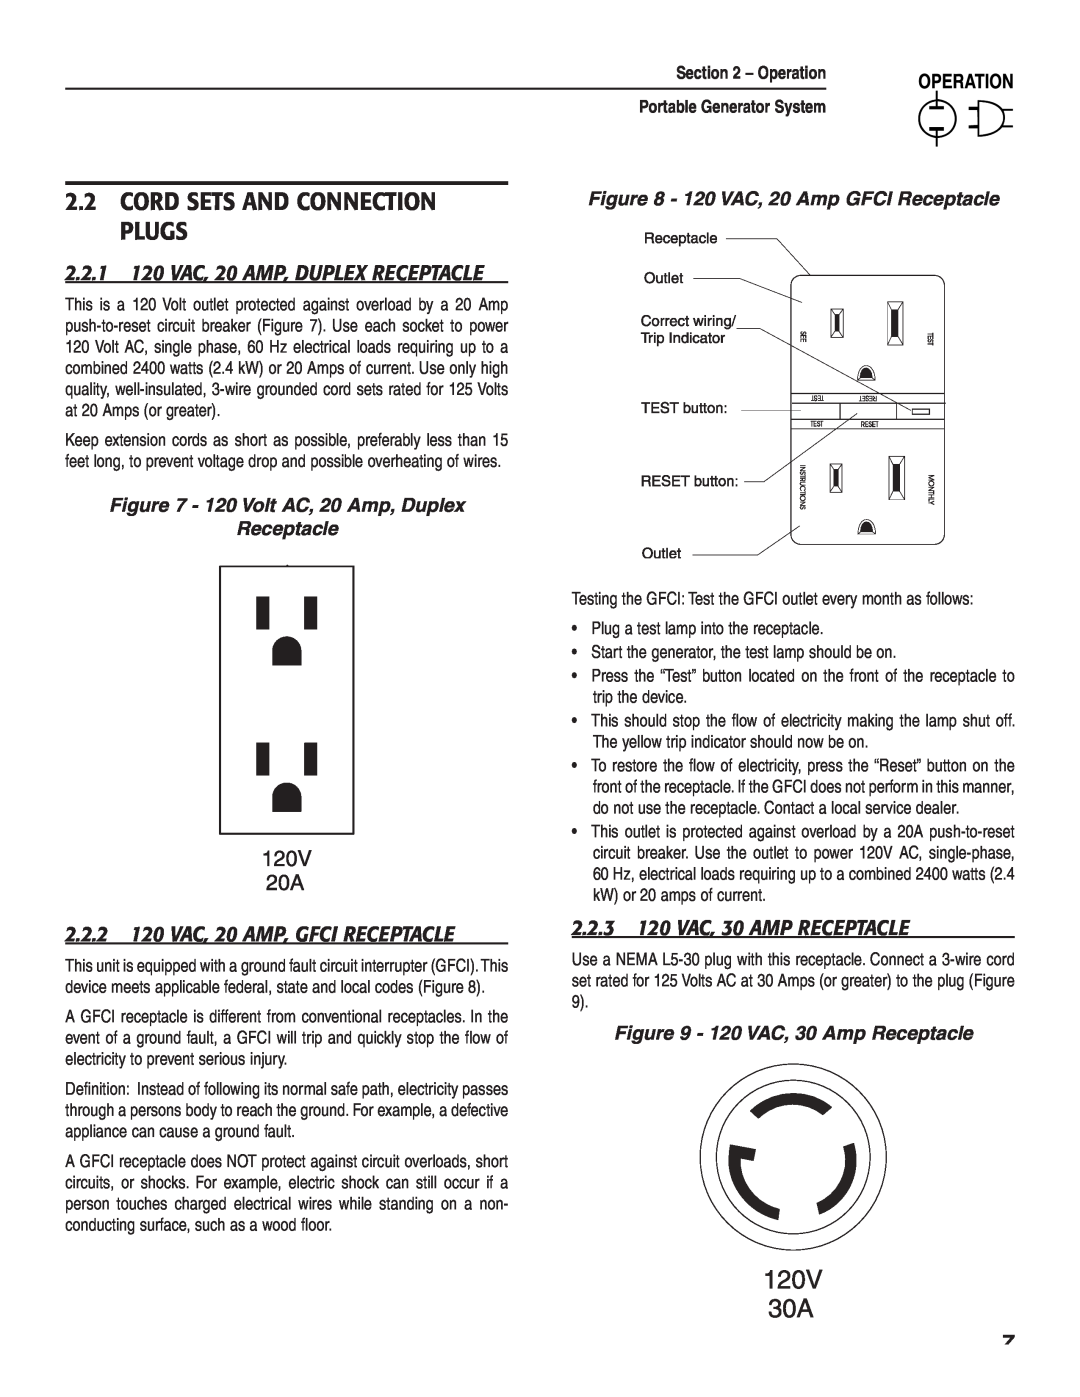 Guardian Technologies 004583-0 owner manual Cord Sets And Connection Plugs, 2.2.1 120 VAC, 20 AMP, DUPLEX RECEPTACLE 